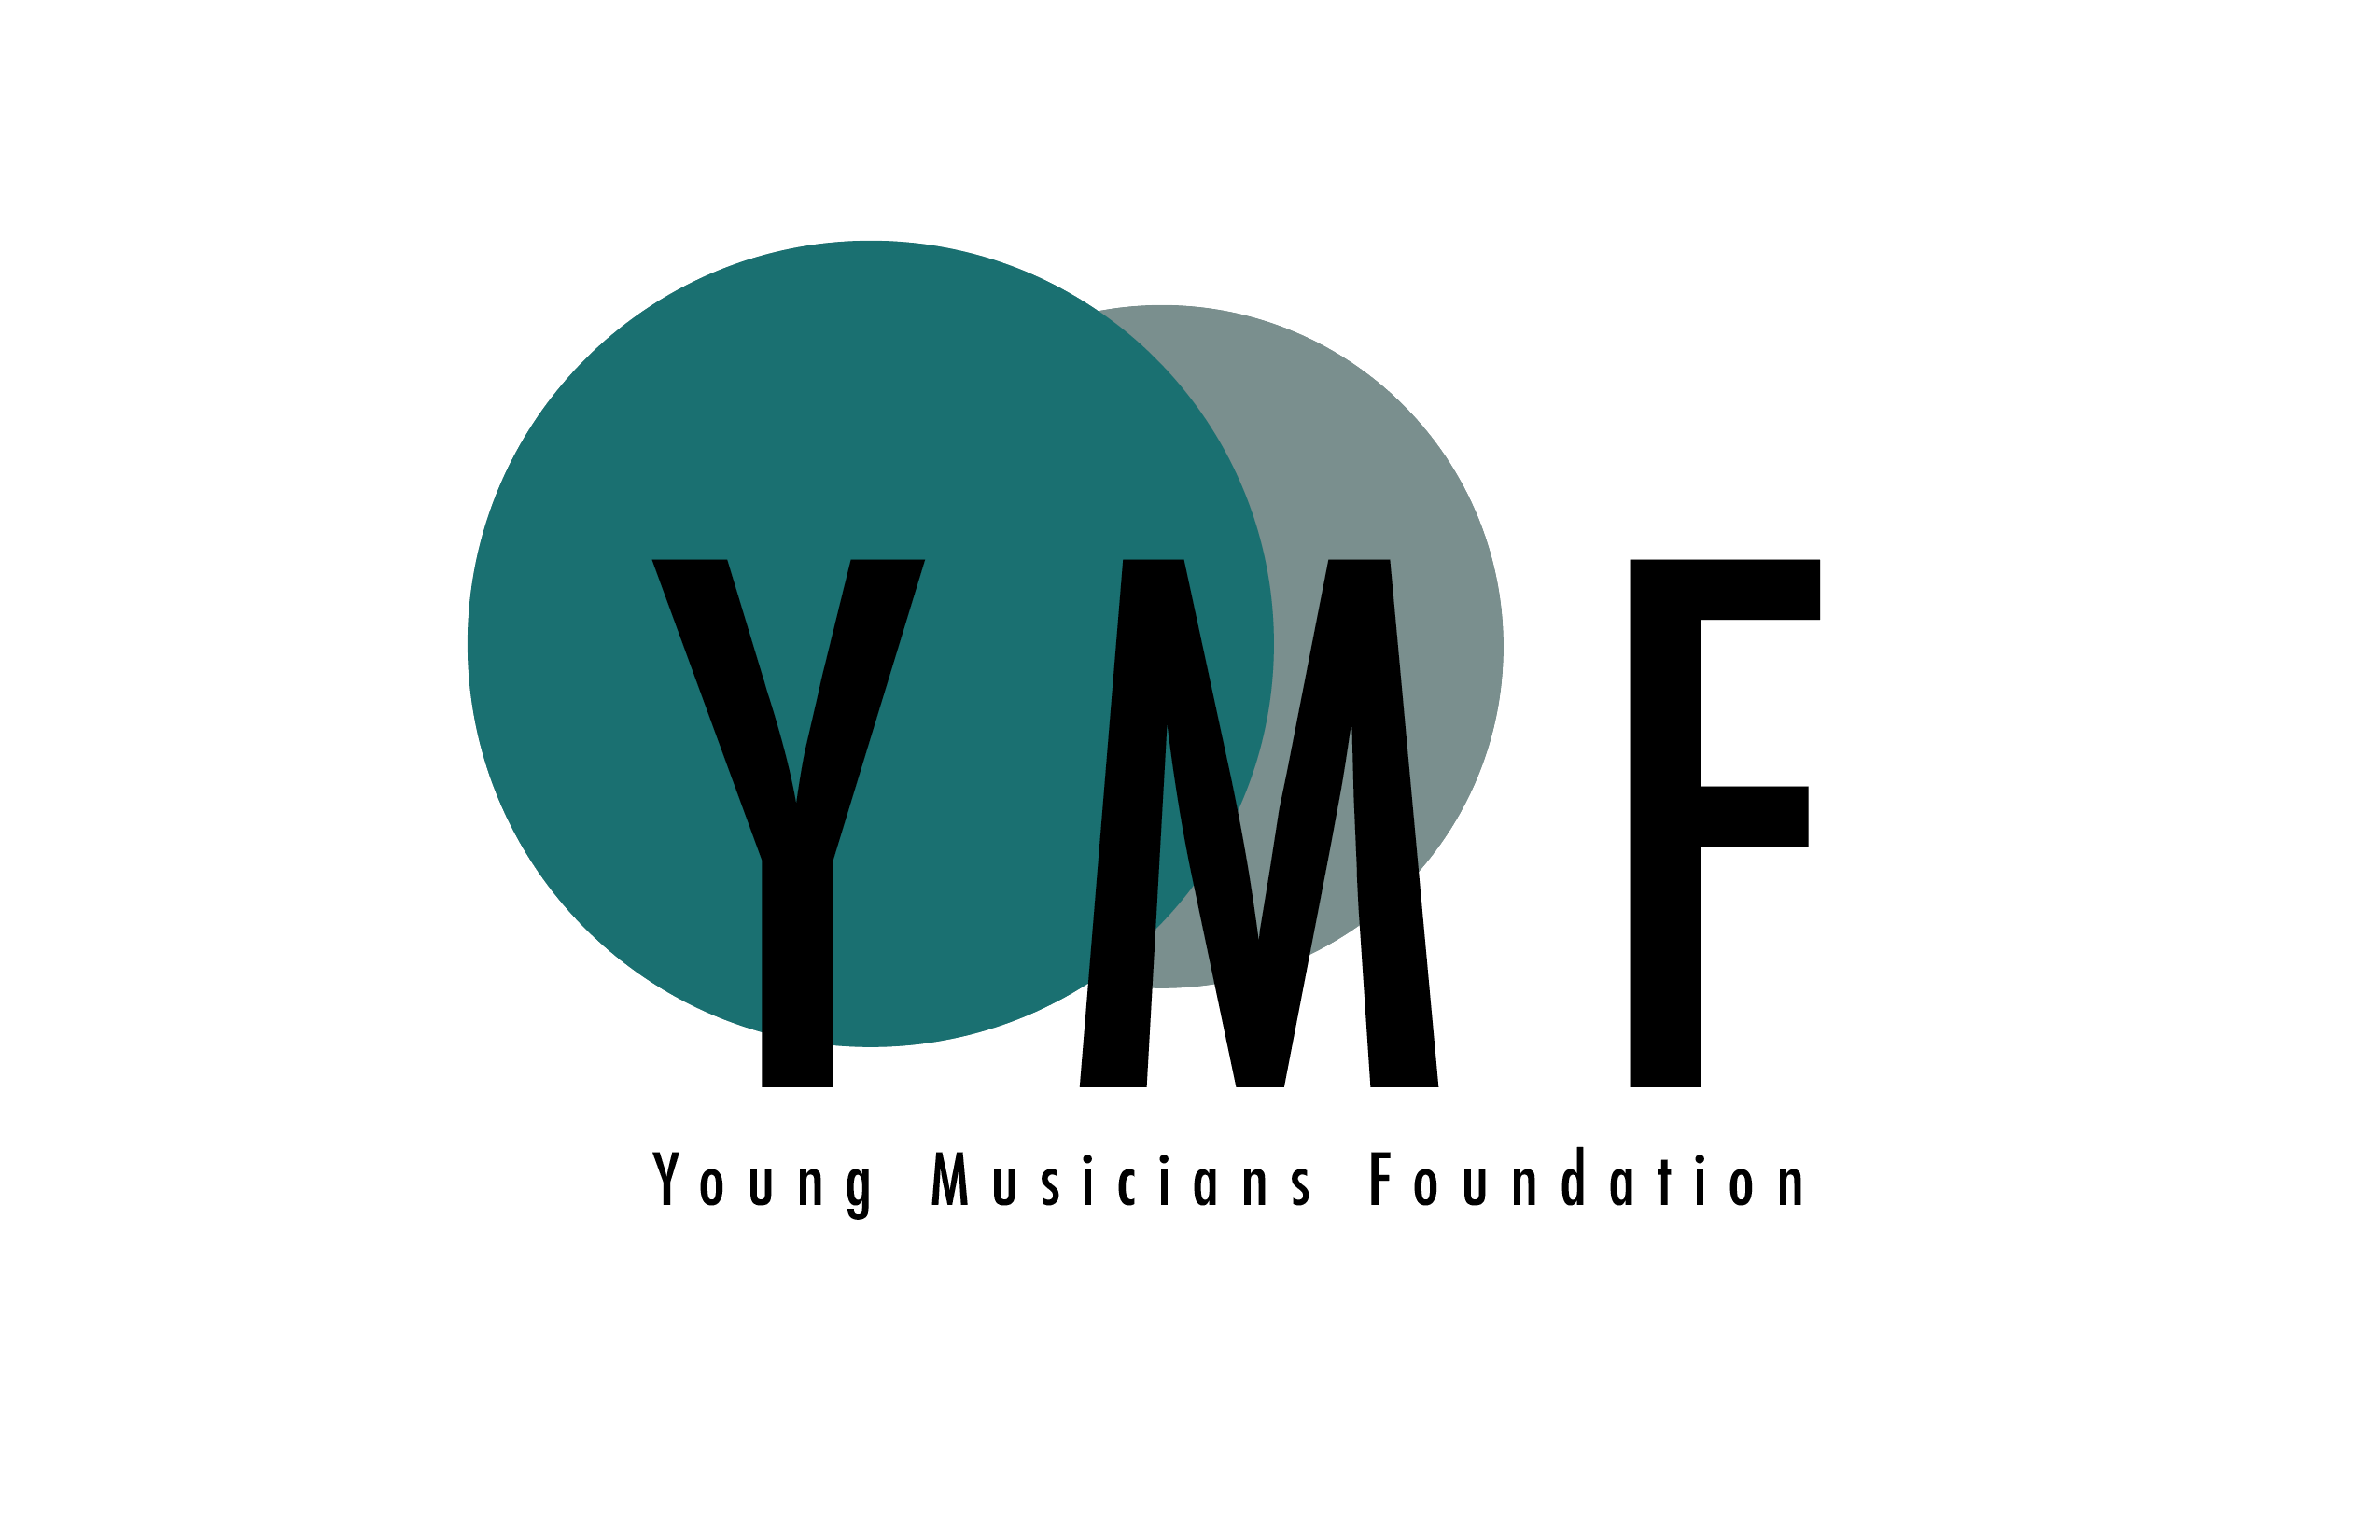 YMF Young Musicians Foundation